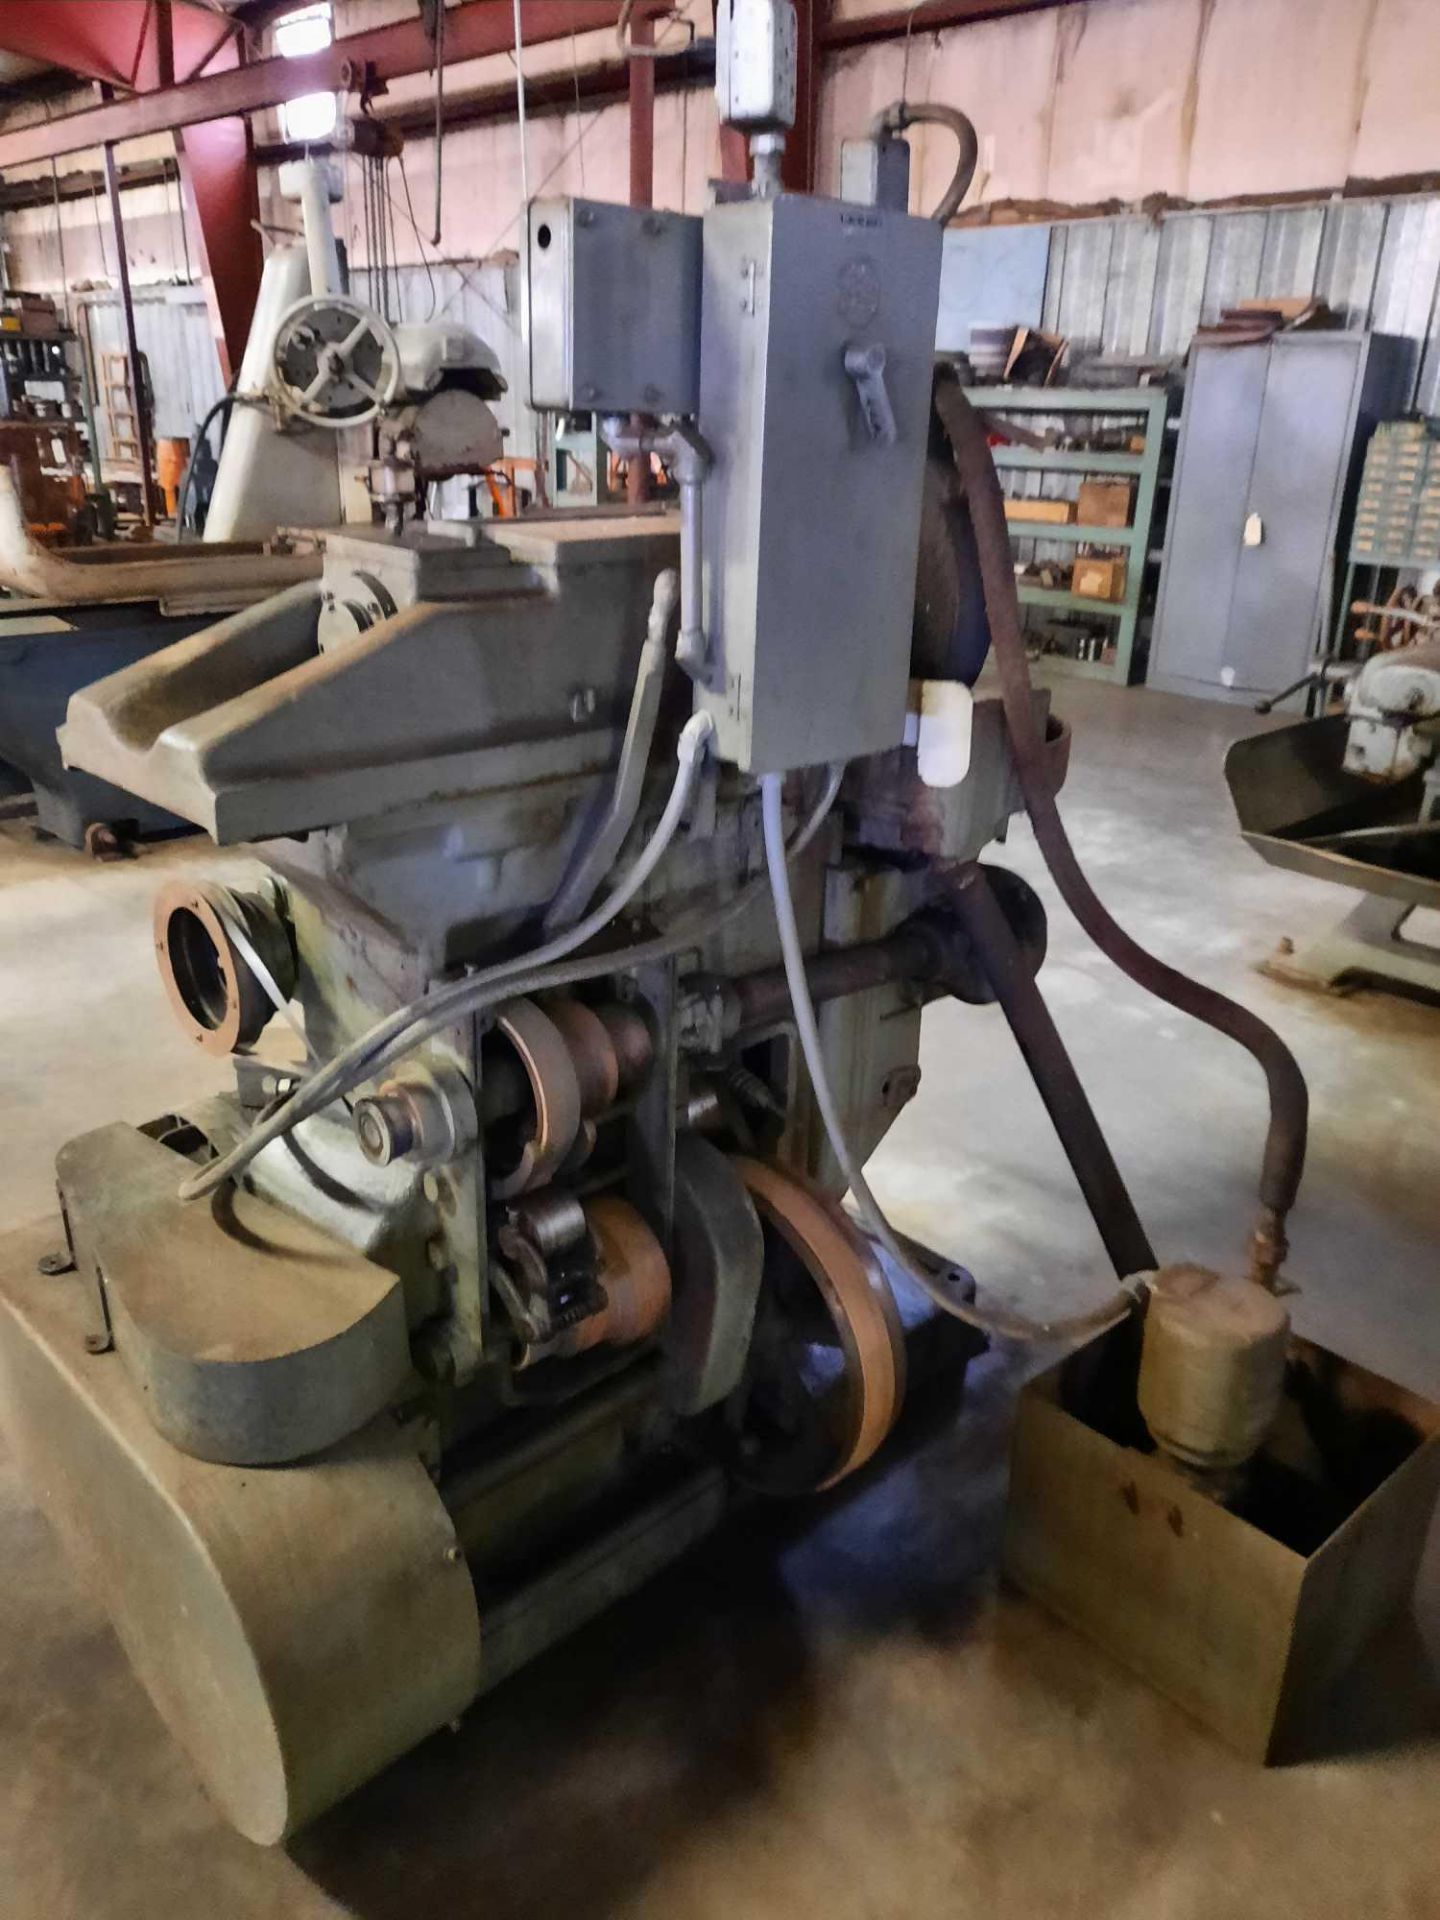 Arter rotary grinder, model A-1-12, serial 603, 14 inch chuck, overall dimensions 66 x 43 x 70 - Image 4 of 8